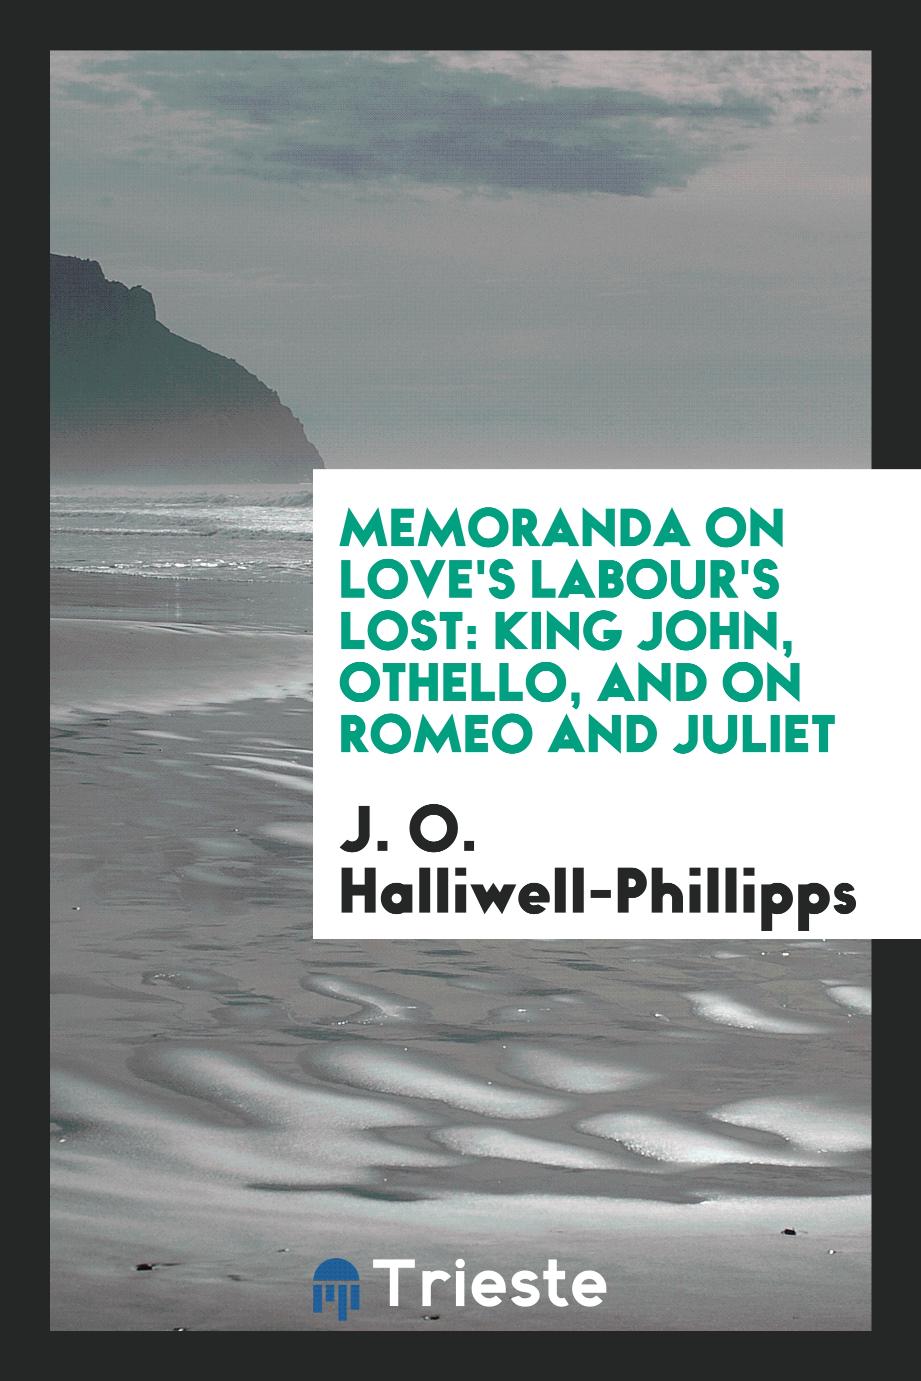 Memoranda on Love's Labour's Lost: King John, Othello, and on Romeo and Juliet